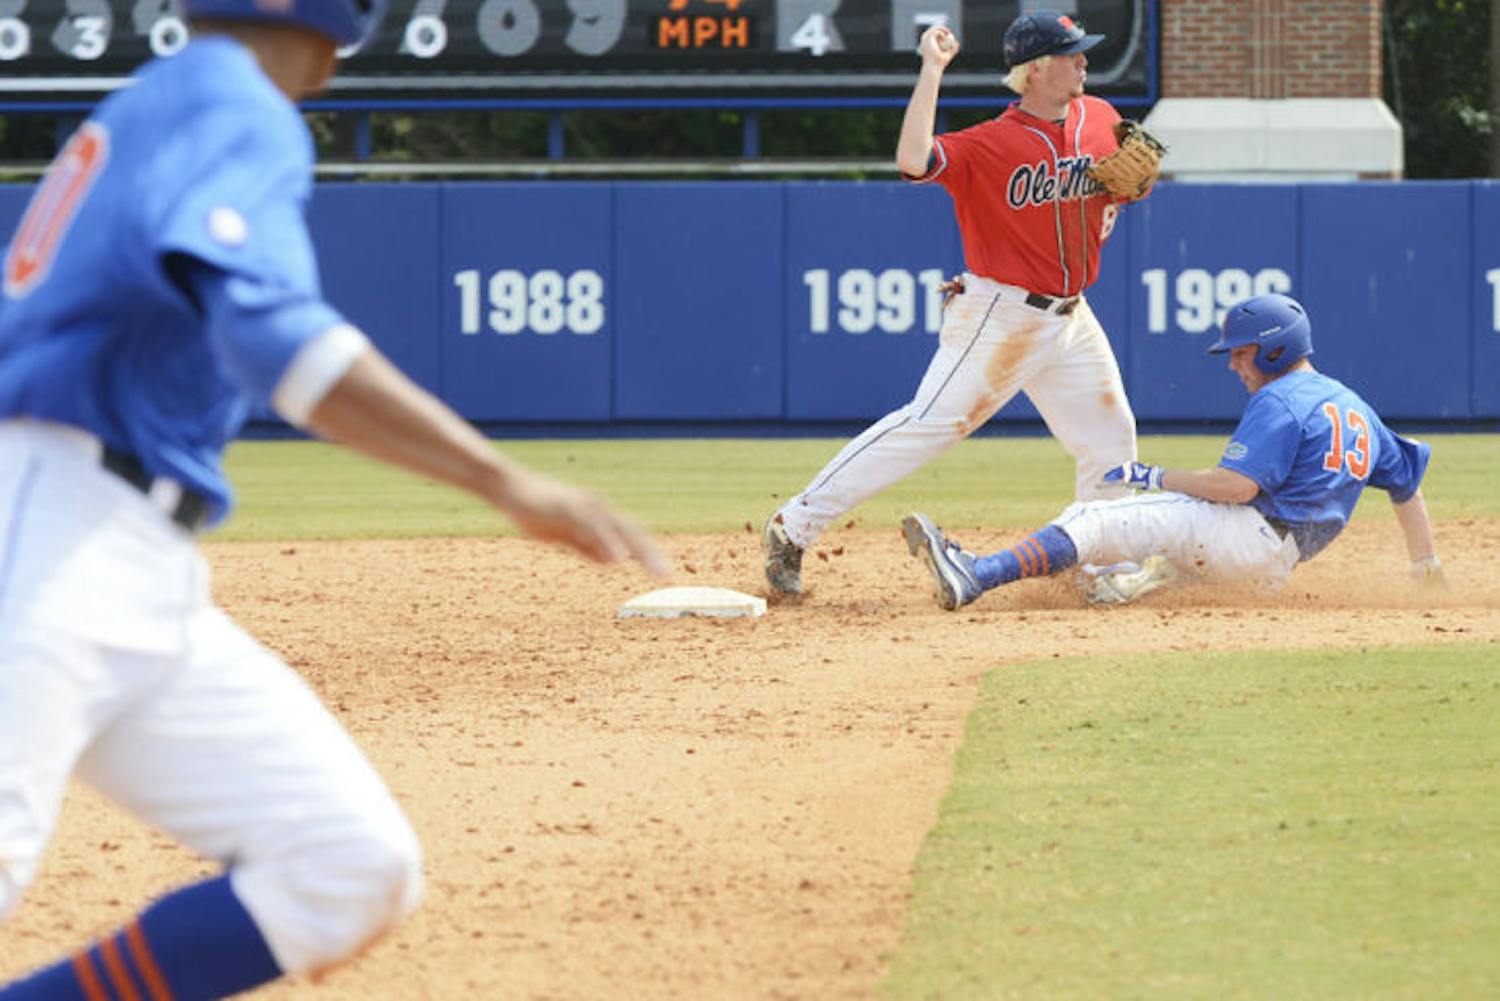 Sophomore outfielder Connor Mitchell (13) slides into second base during Florida’s 4-0 win against Ole Miss on March 31 at McKethan Stadium.